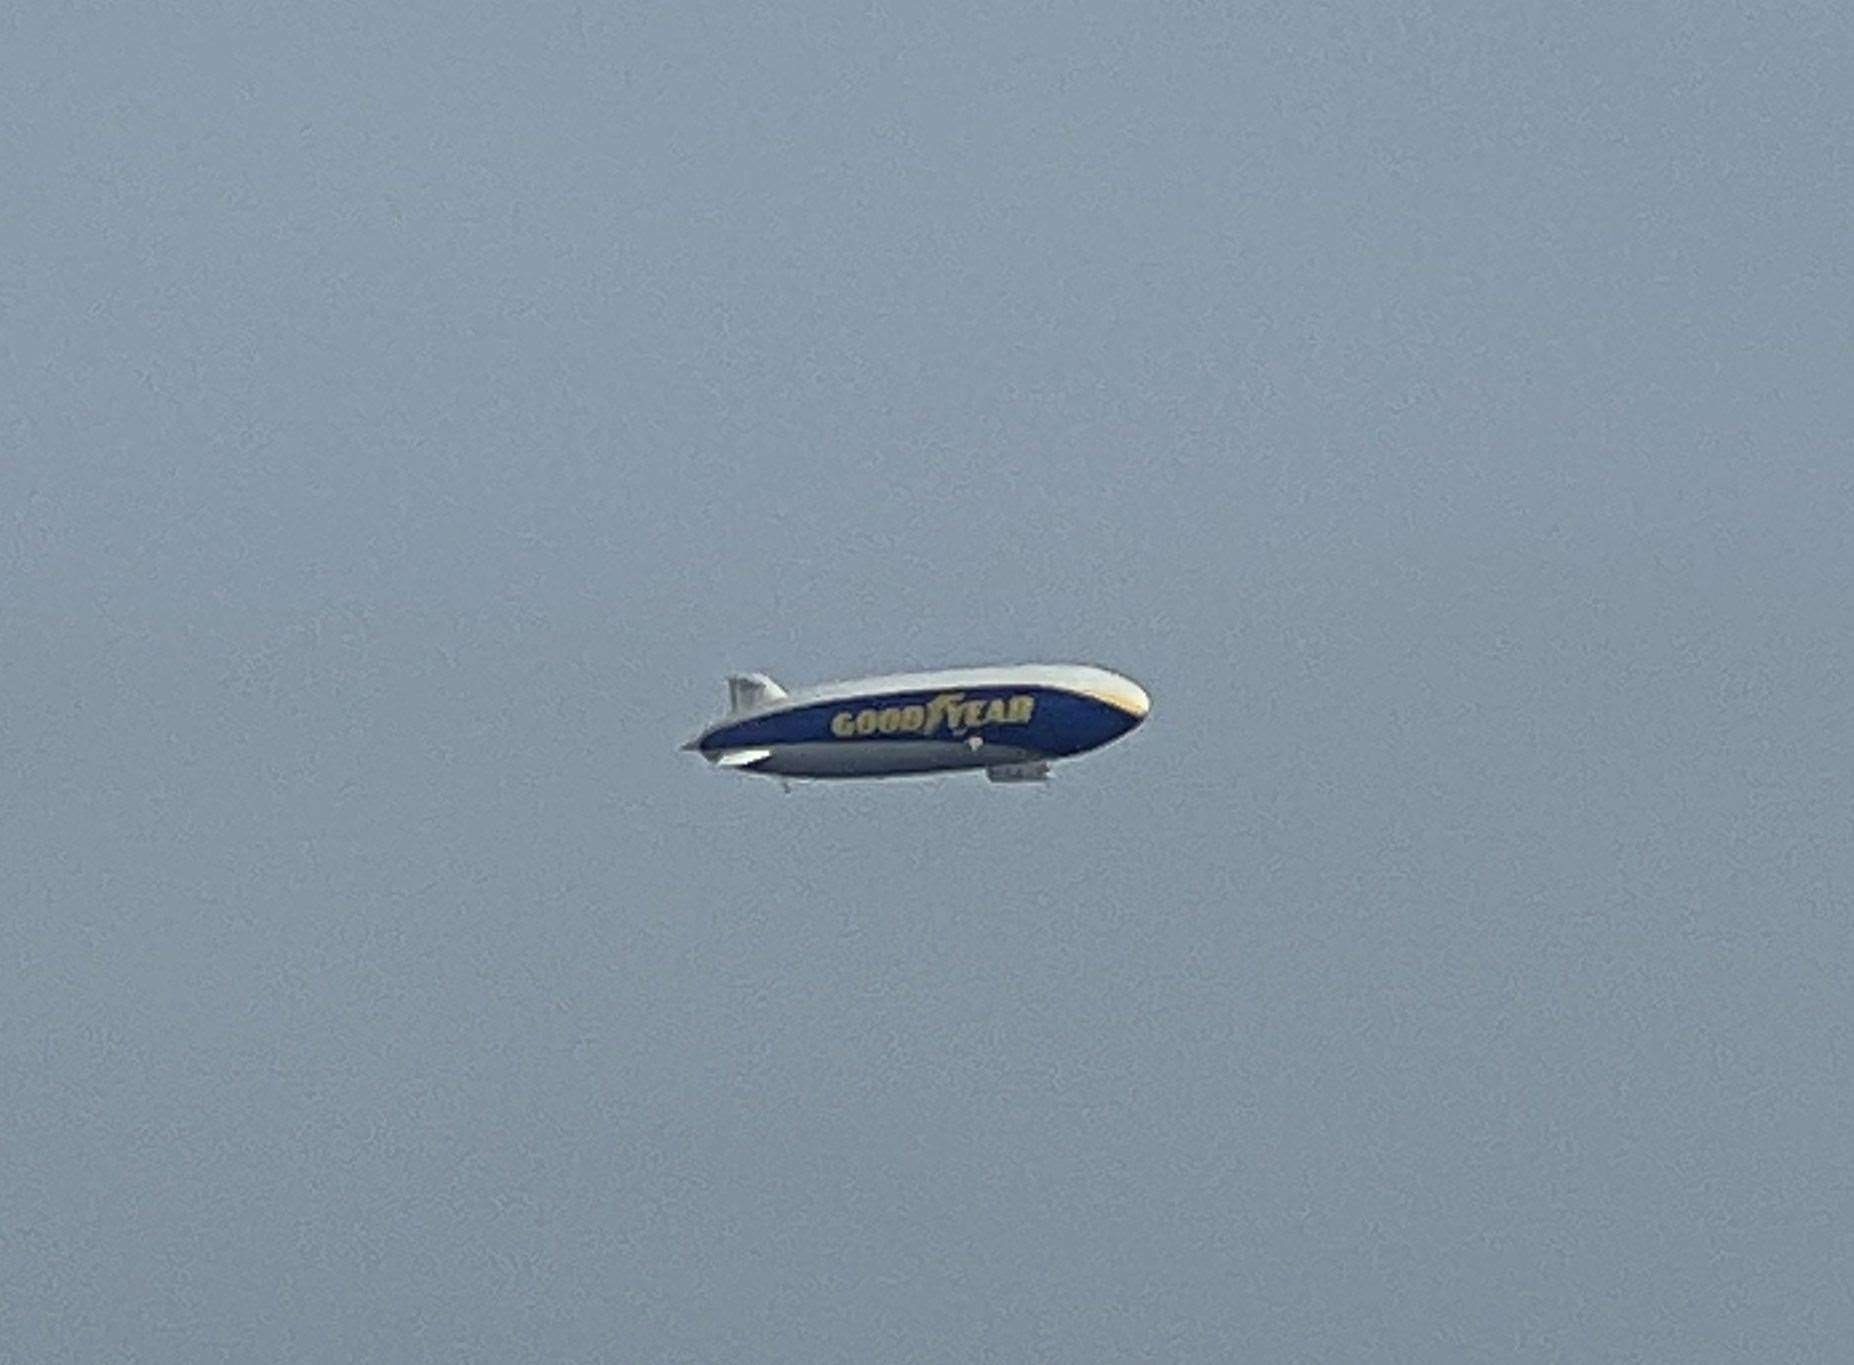 The Goodyear blimp has returned to Kent ahead of a schedule of events this week. Photo: James Maybank